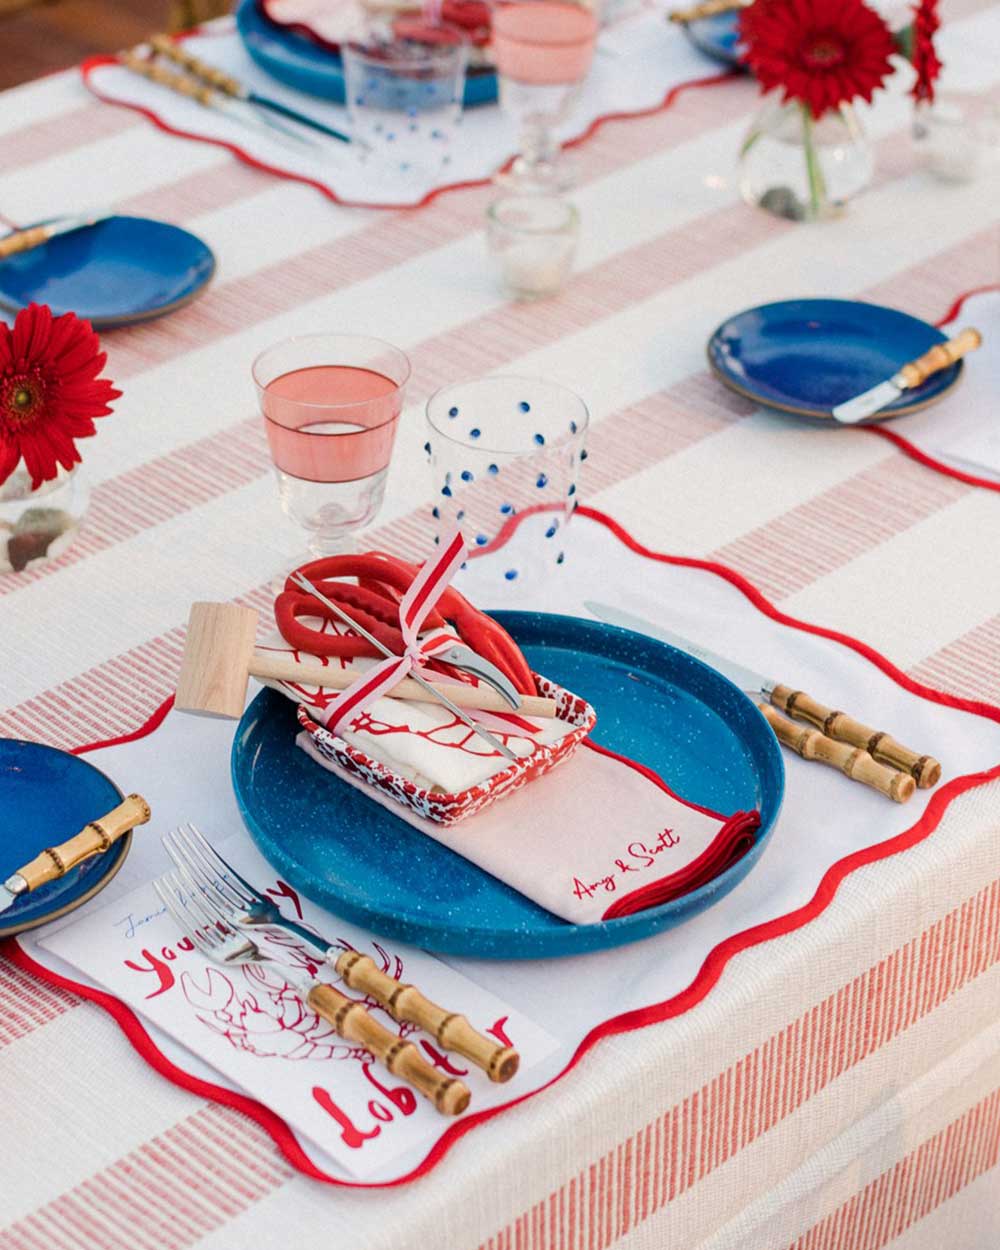 Wedding table setting with cloth napkins with custom monogramming from Atelier Saucier, Los Angeles-based tabletop brand.